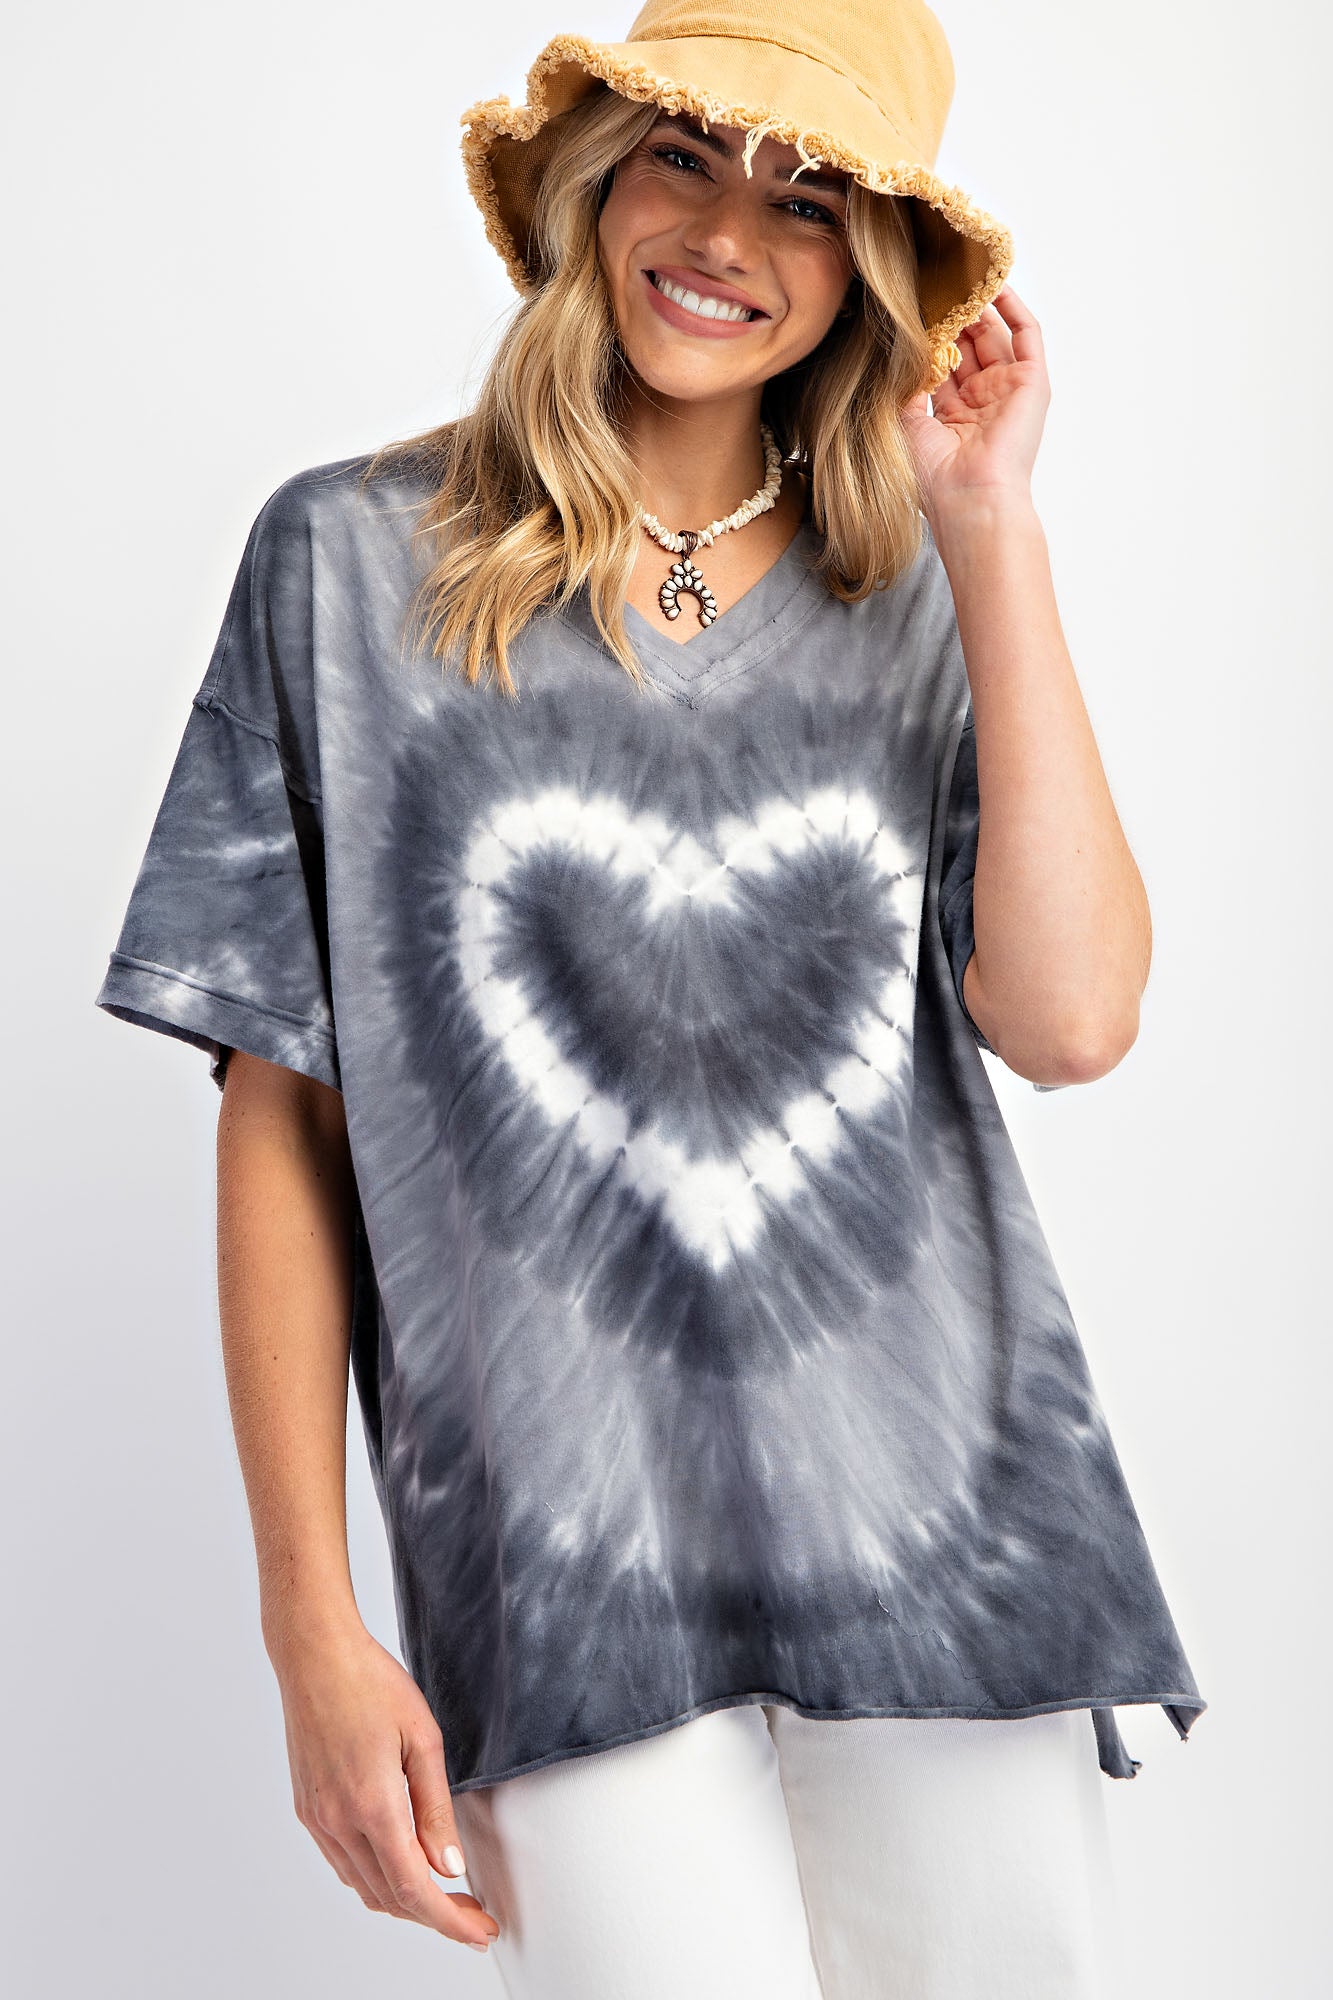 Heart Tie Dye Washed Top by Easel-Apparel-Easel-LouisGeorge Boutique, Women’s Fashion Boutique Located in Trussville, Alabama